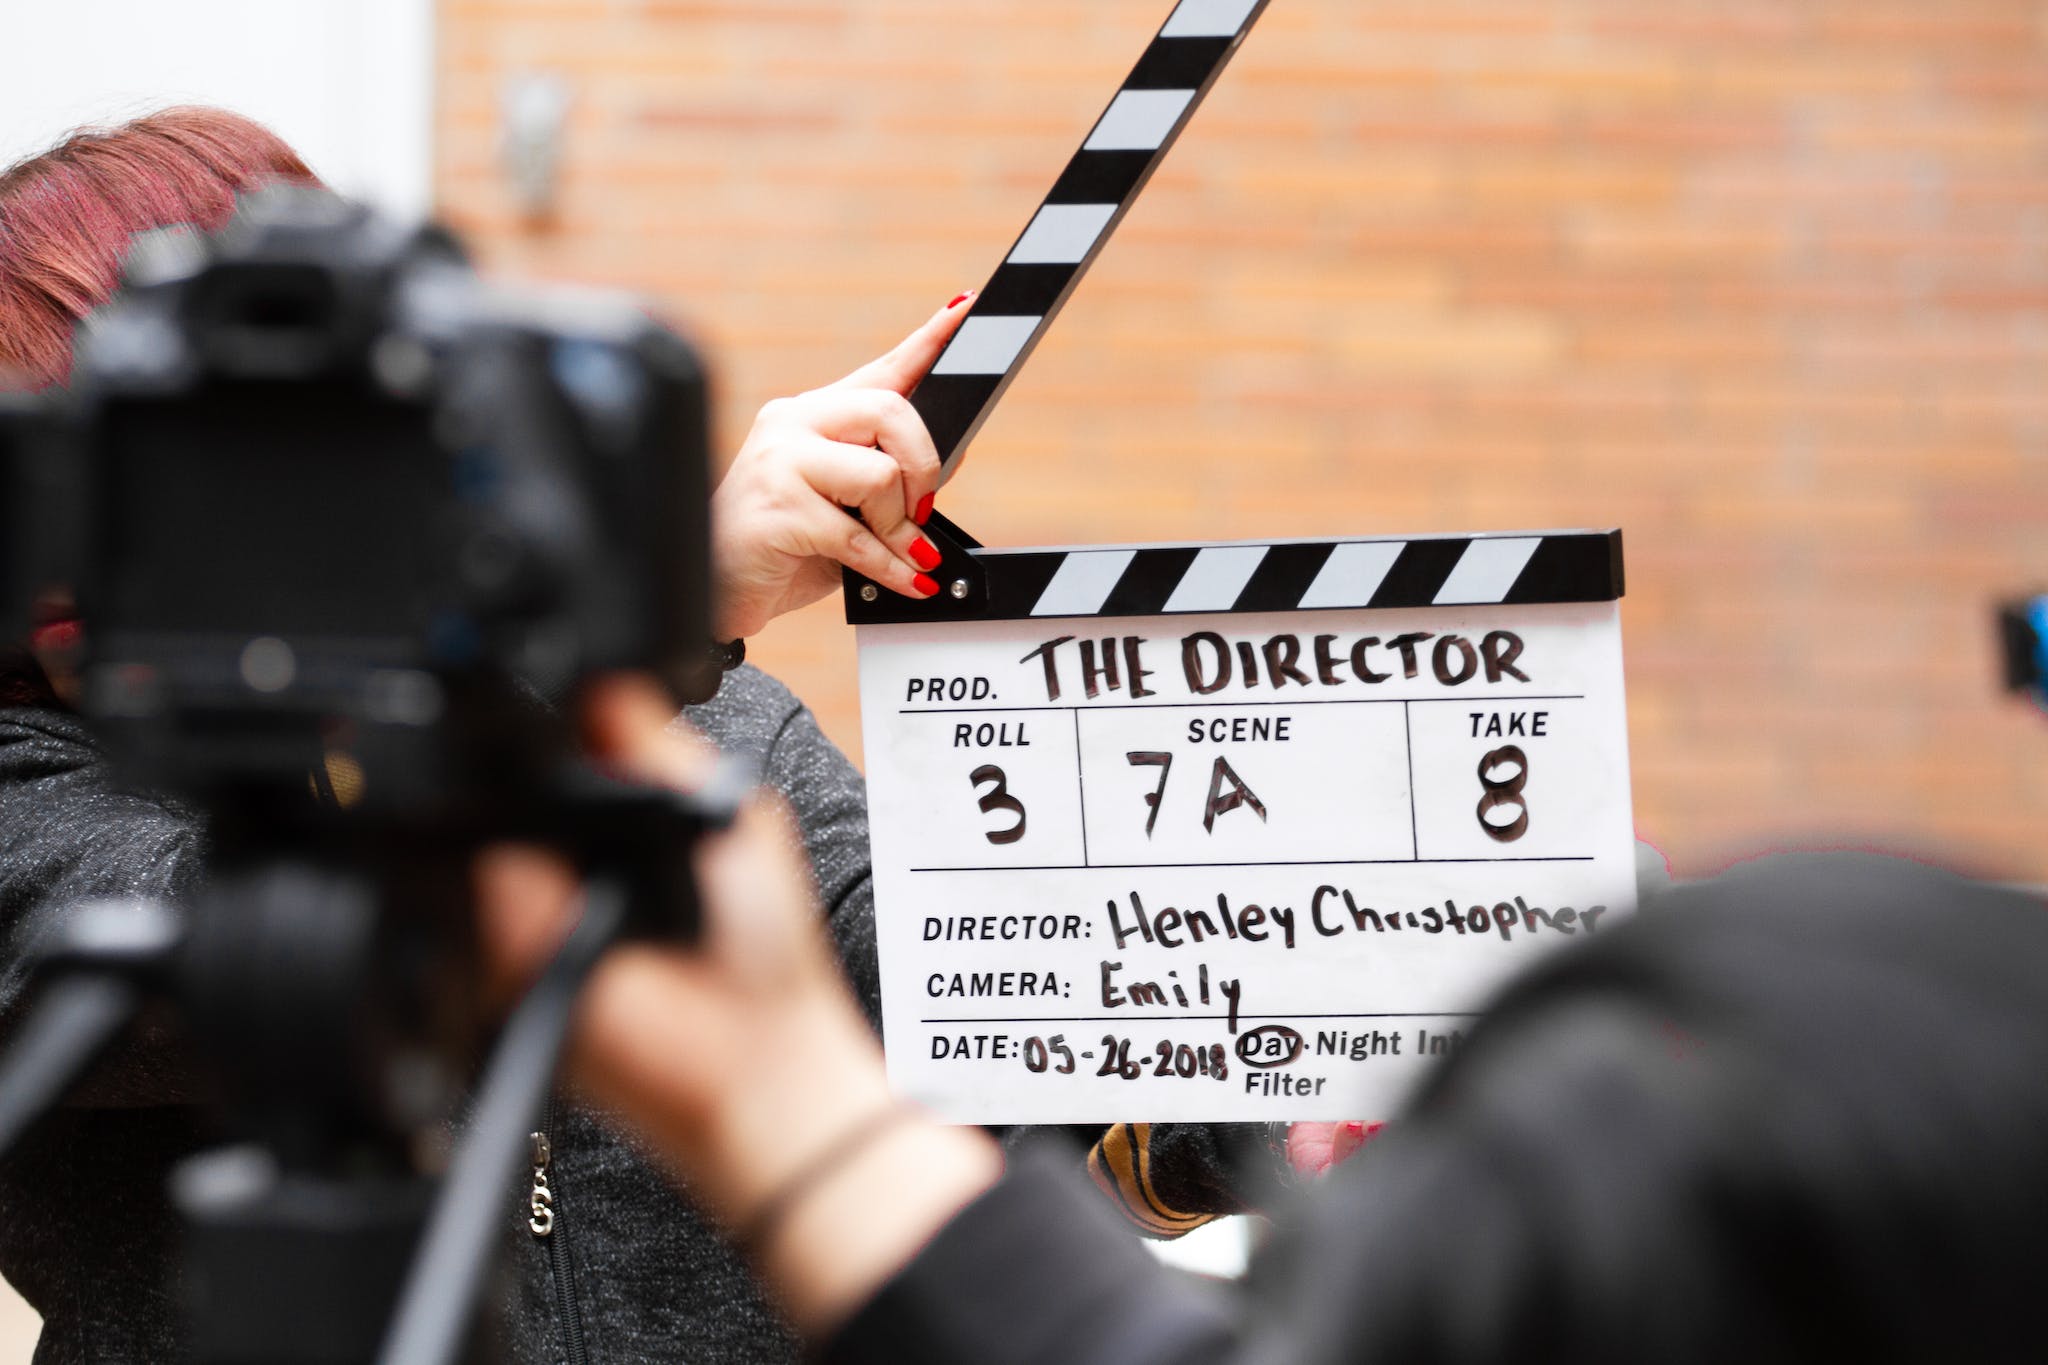 Man Holding Clapper Board
Photo by Martin Lopez